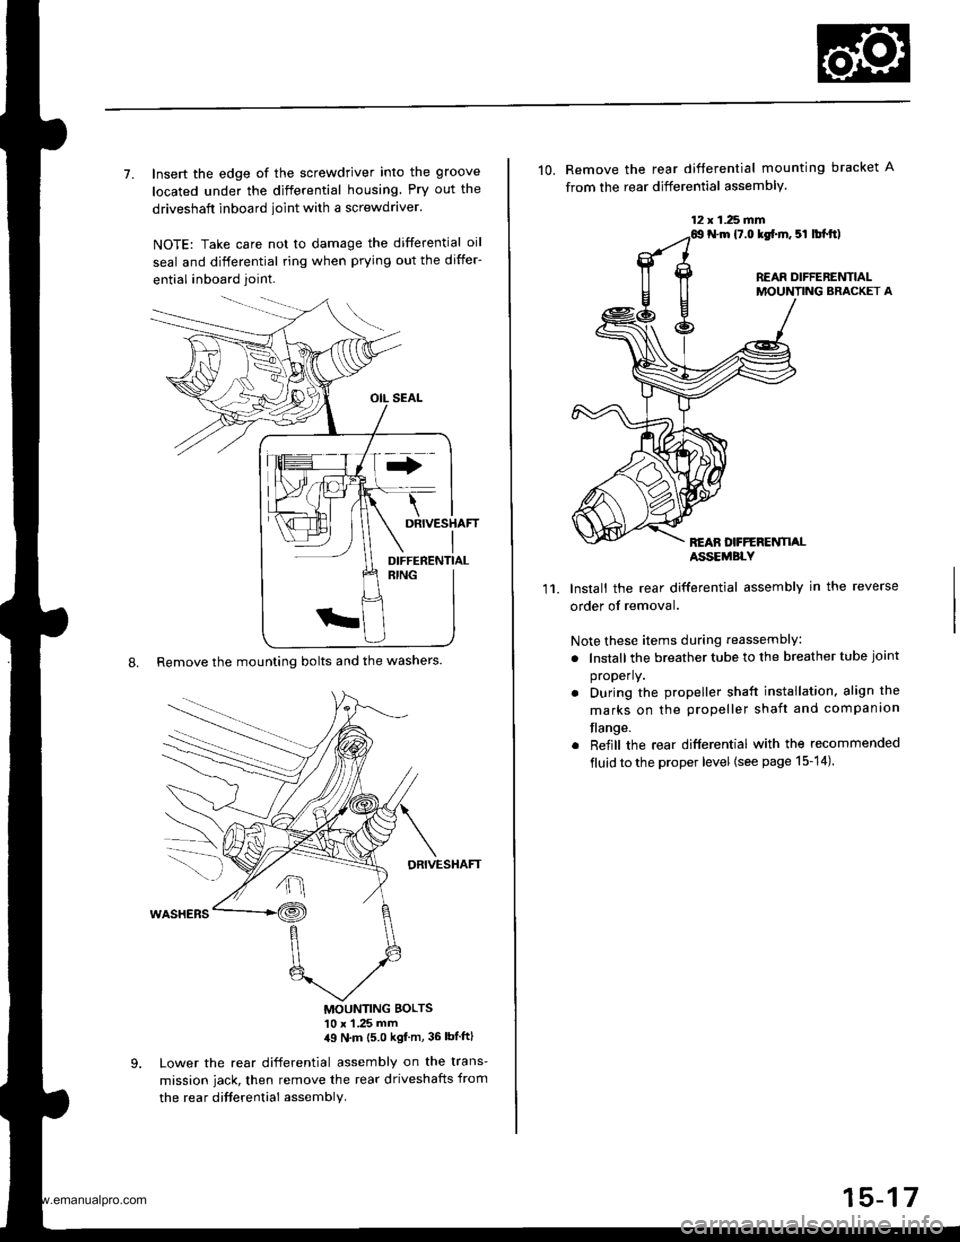 HONDA CR-V 1998 RD1-RD3 / 1.G Workshop Manual 
7. Insert the edge of the screwdriver into the groove
located under the differential housing Pry out the
driveshaft inboard ioint with a screwdraver.
NOTE: Take care not to damage the differential oi